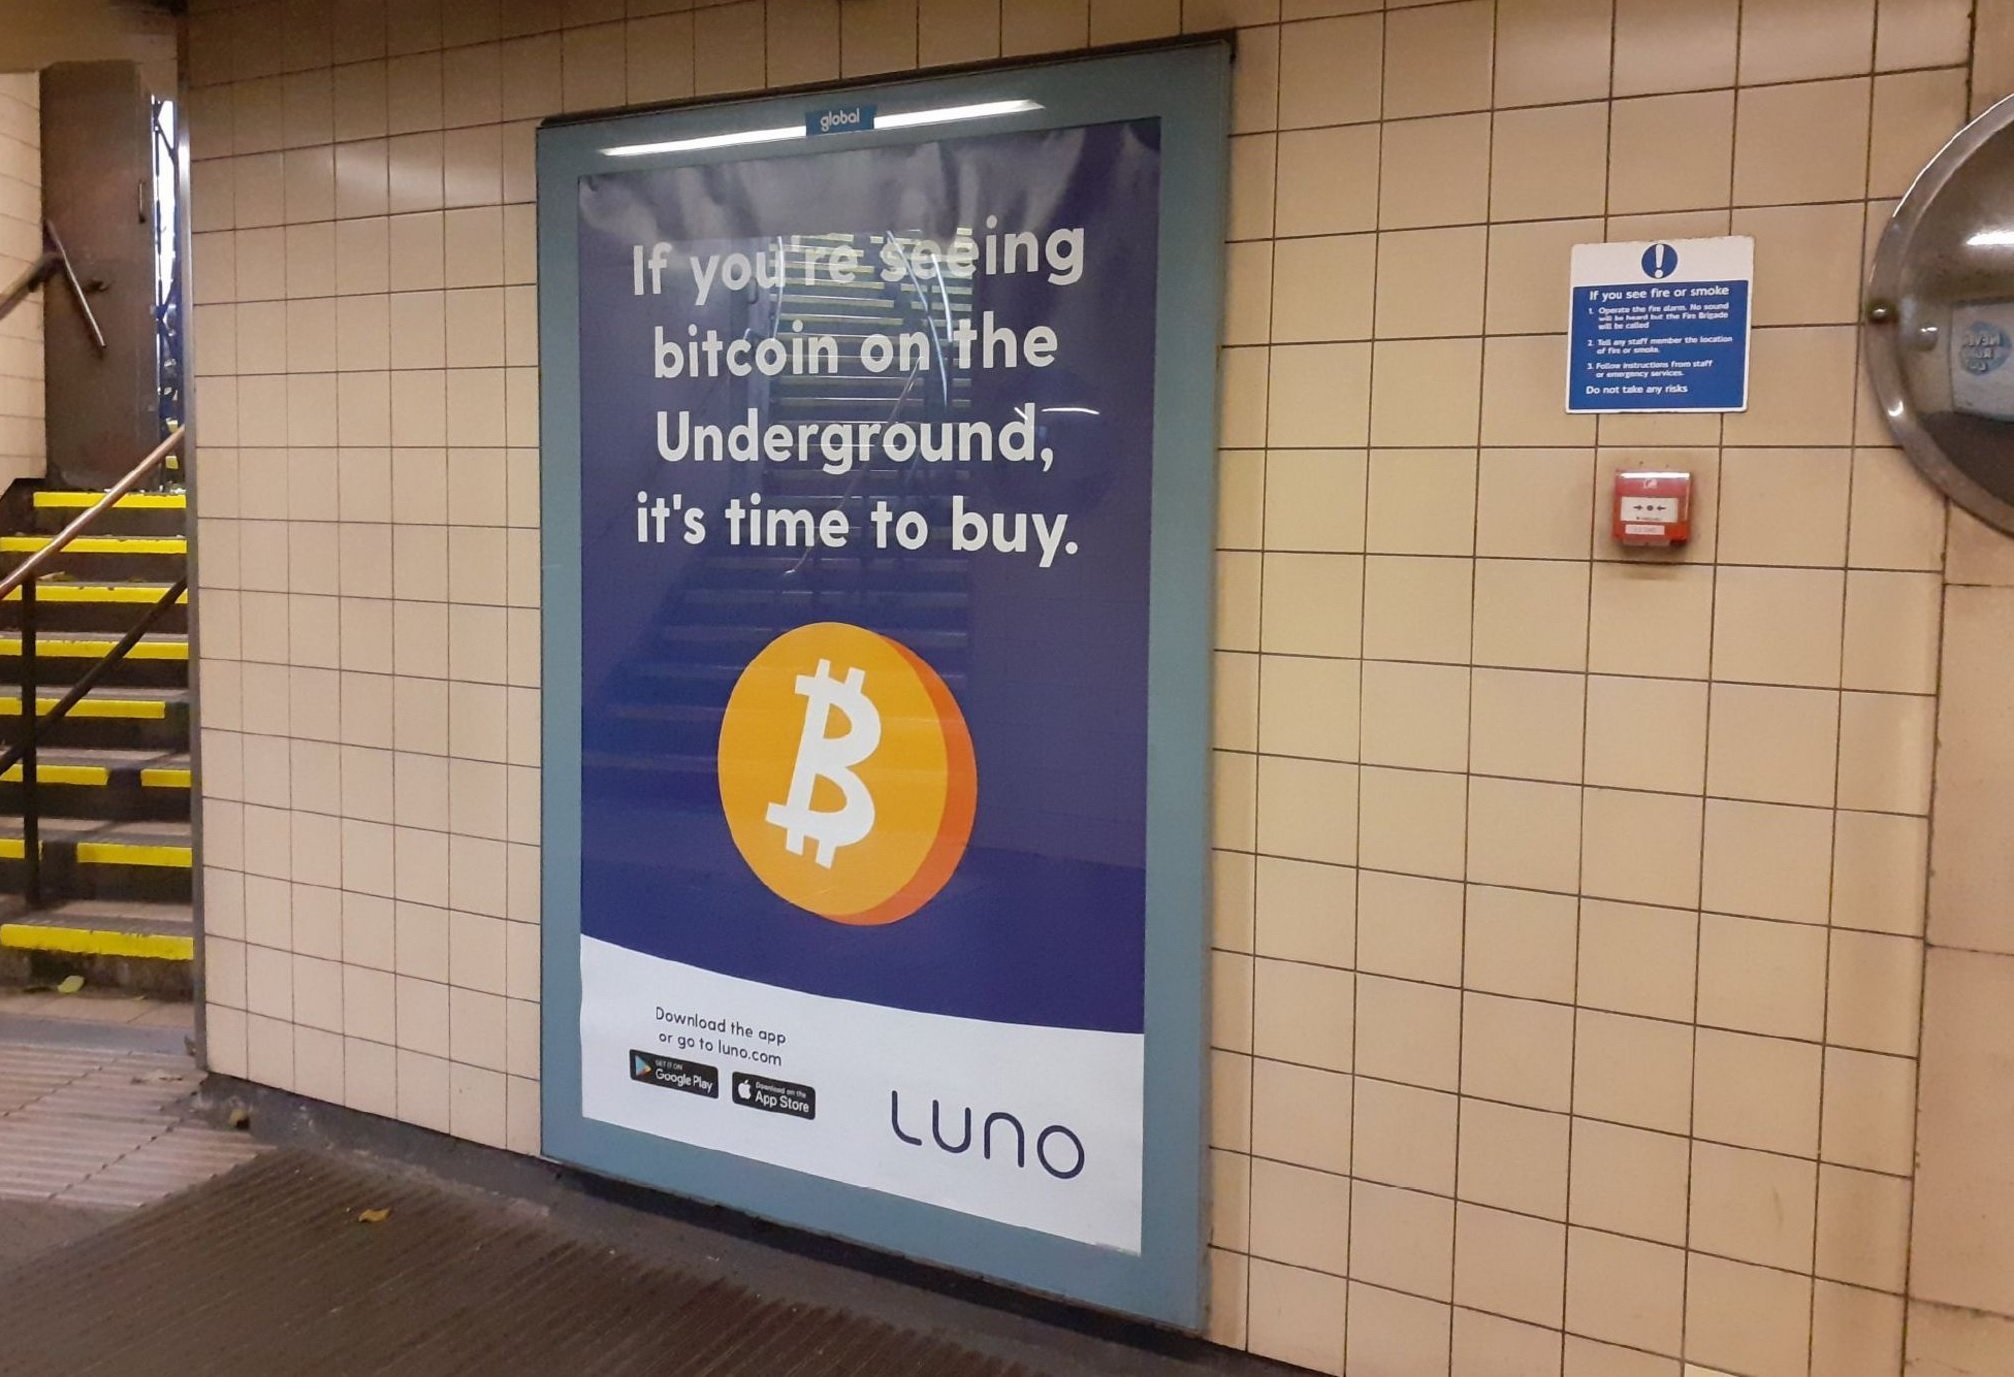 UK Authority Bans 'Time to Buy' Bitcoin Ad for Being Misleading and Irresponsible